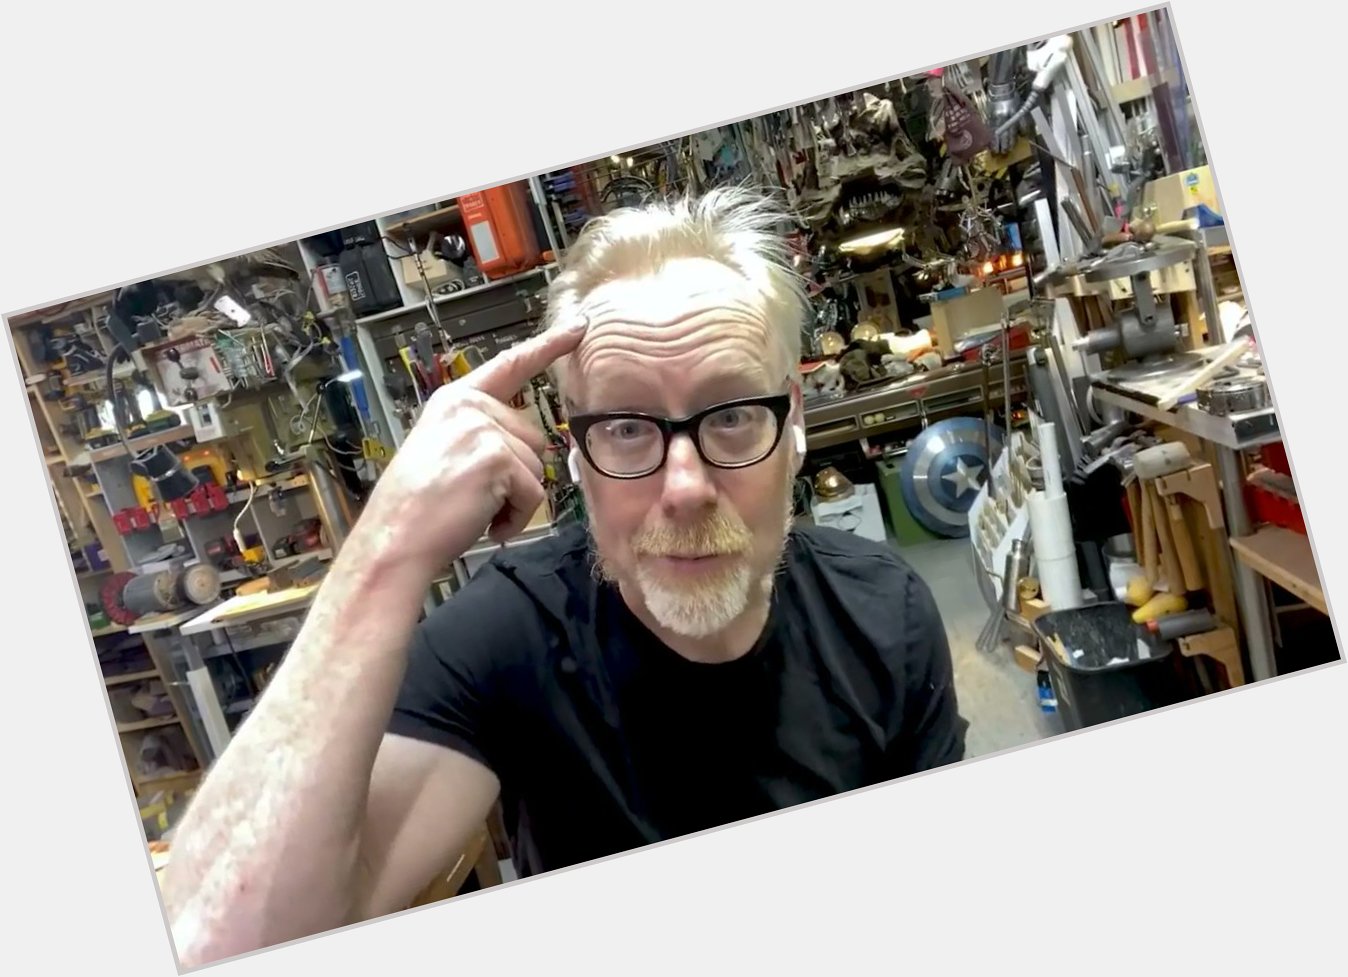 Morning! Today when I read messages, they will be in the voice of Adam Savage. Happy birthday 